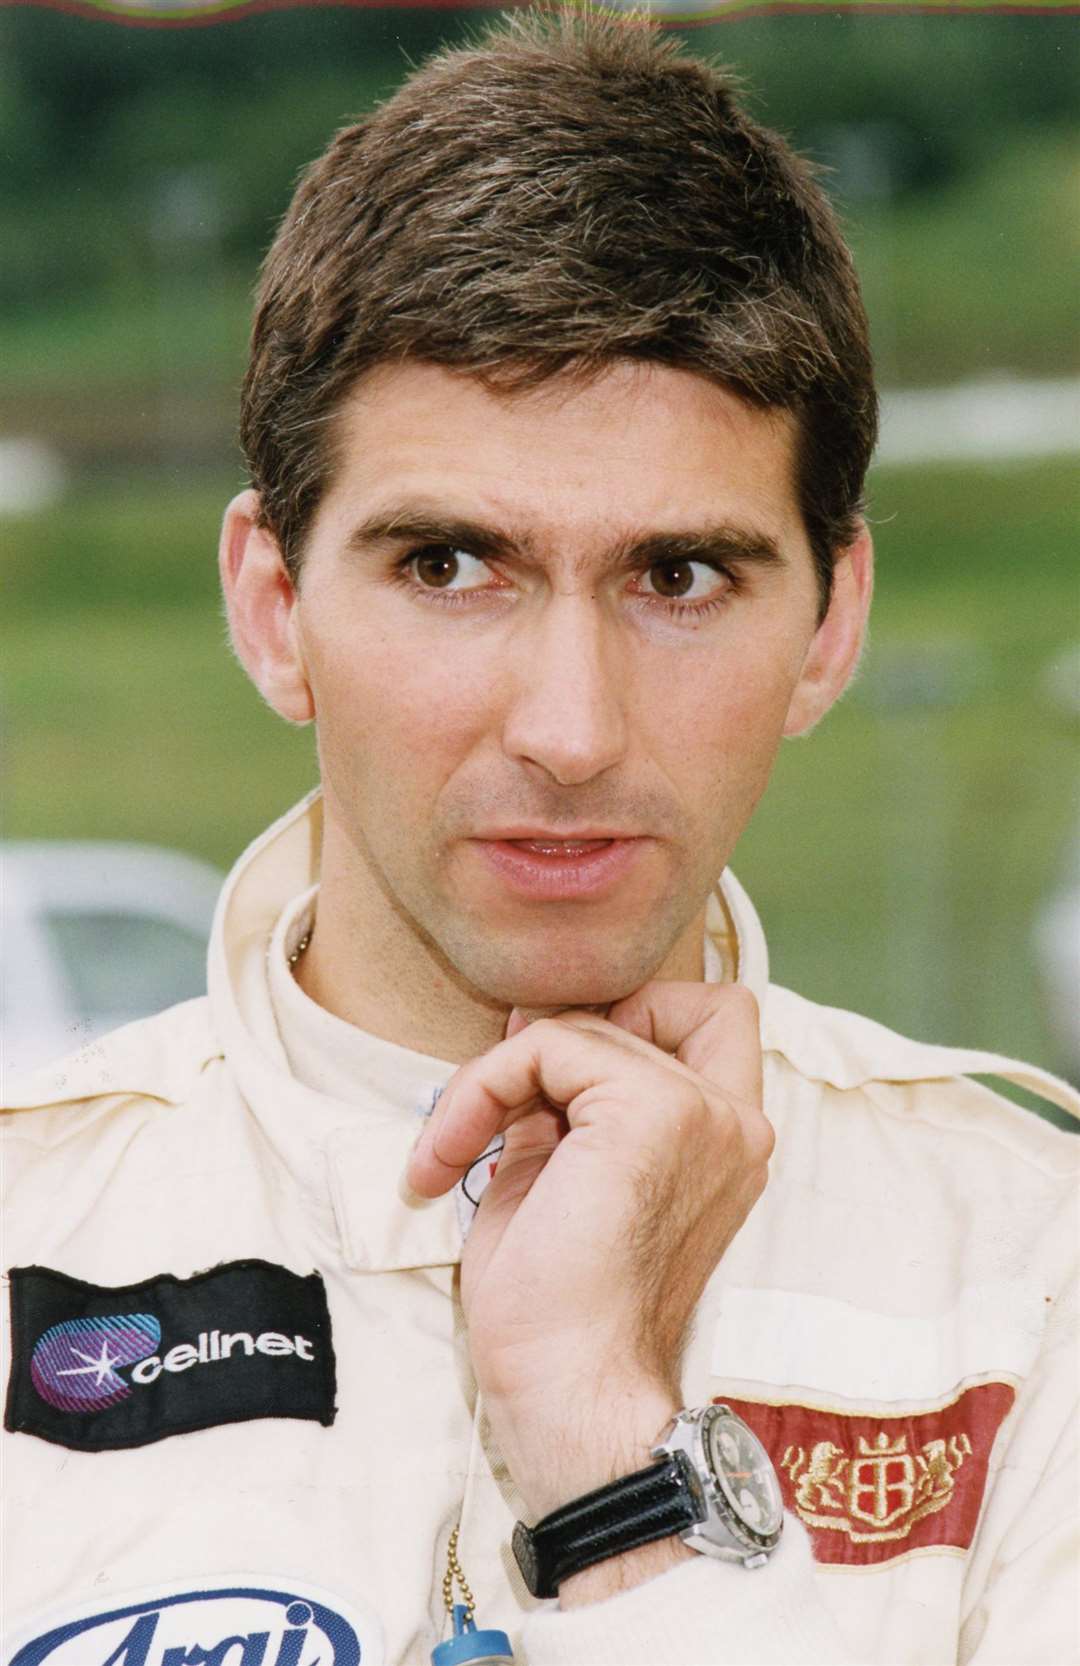 Damon, pictured in 1991 during his Formula 3000 days, is continuing to provide analysis for Sky Sports F1 this season. He raced in F1 for Brabham, Williams, Arrows and Jordan before retiring at the end of the 1999 season